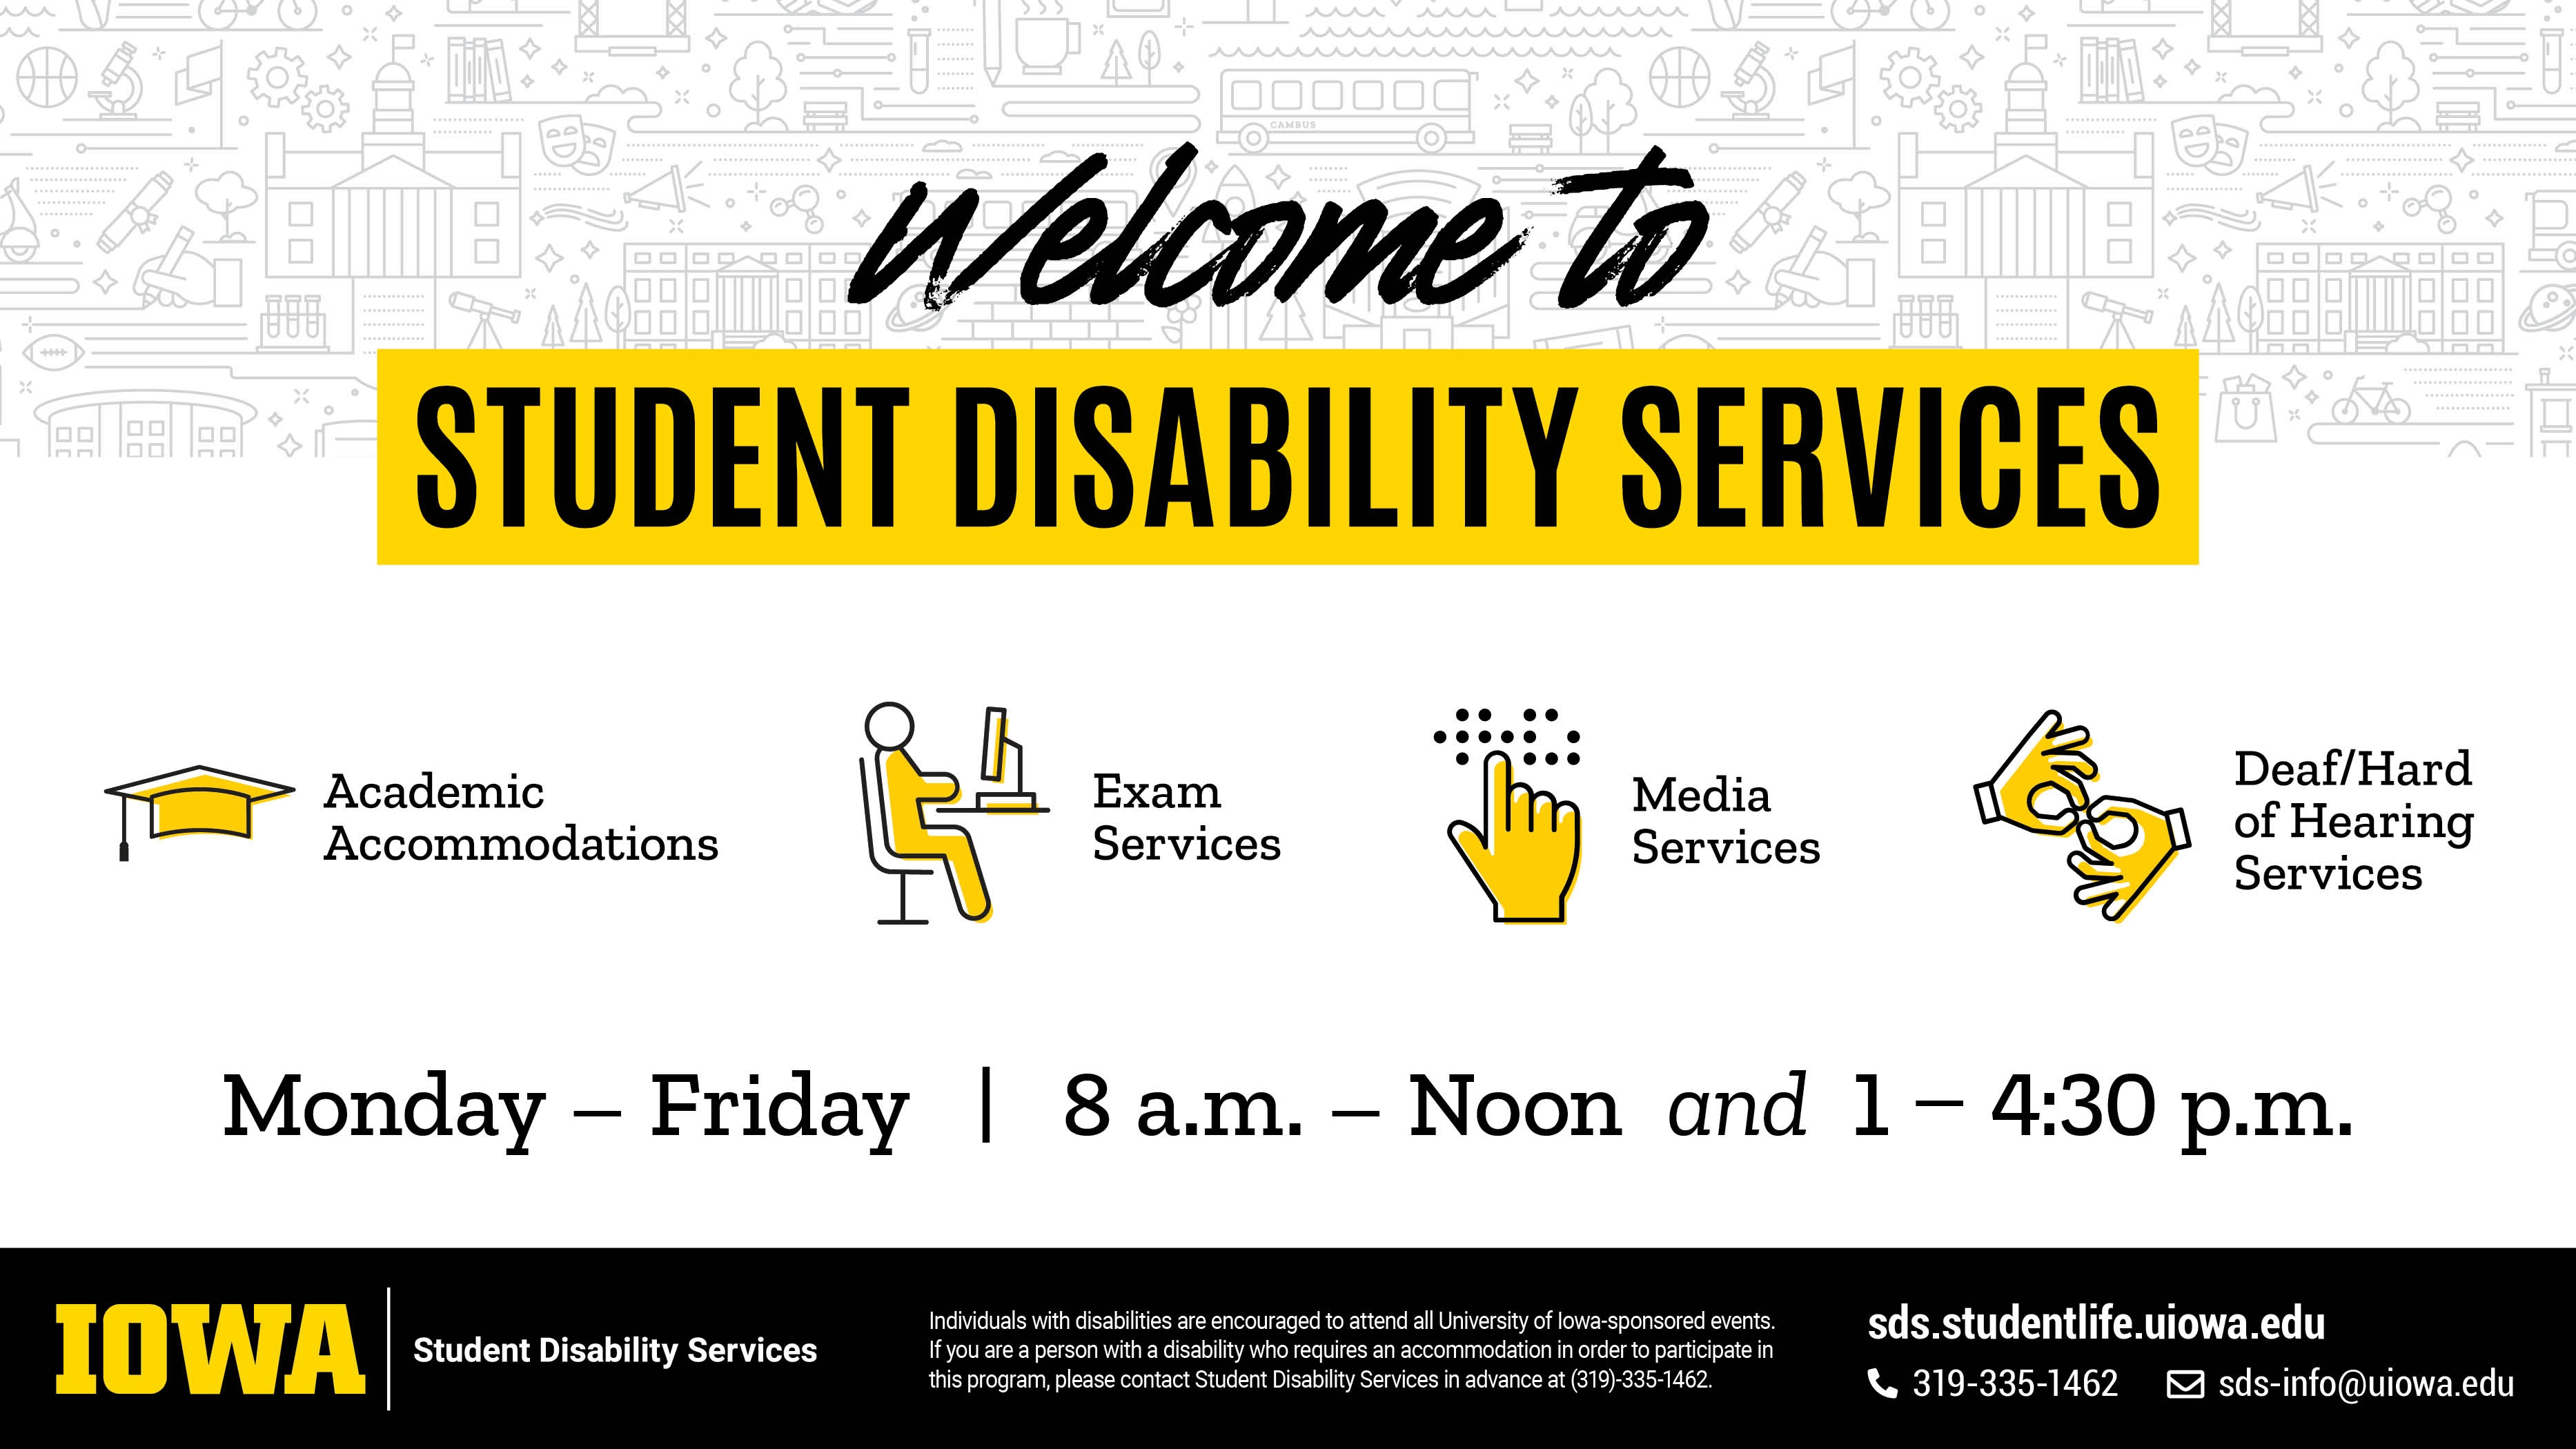 Welcome to Student Disability Services Academic Accommodations, Exam Services, Media Services, Deaf/Hard of Hearing Services Monday-Friday, 8am-noon 1-4:30pm. 